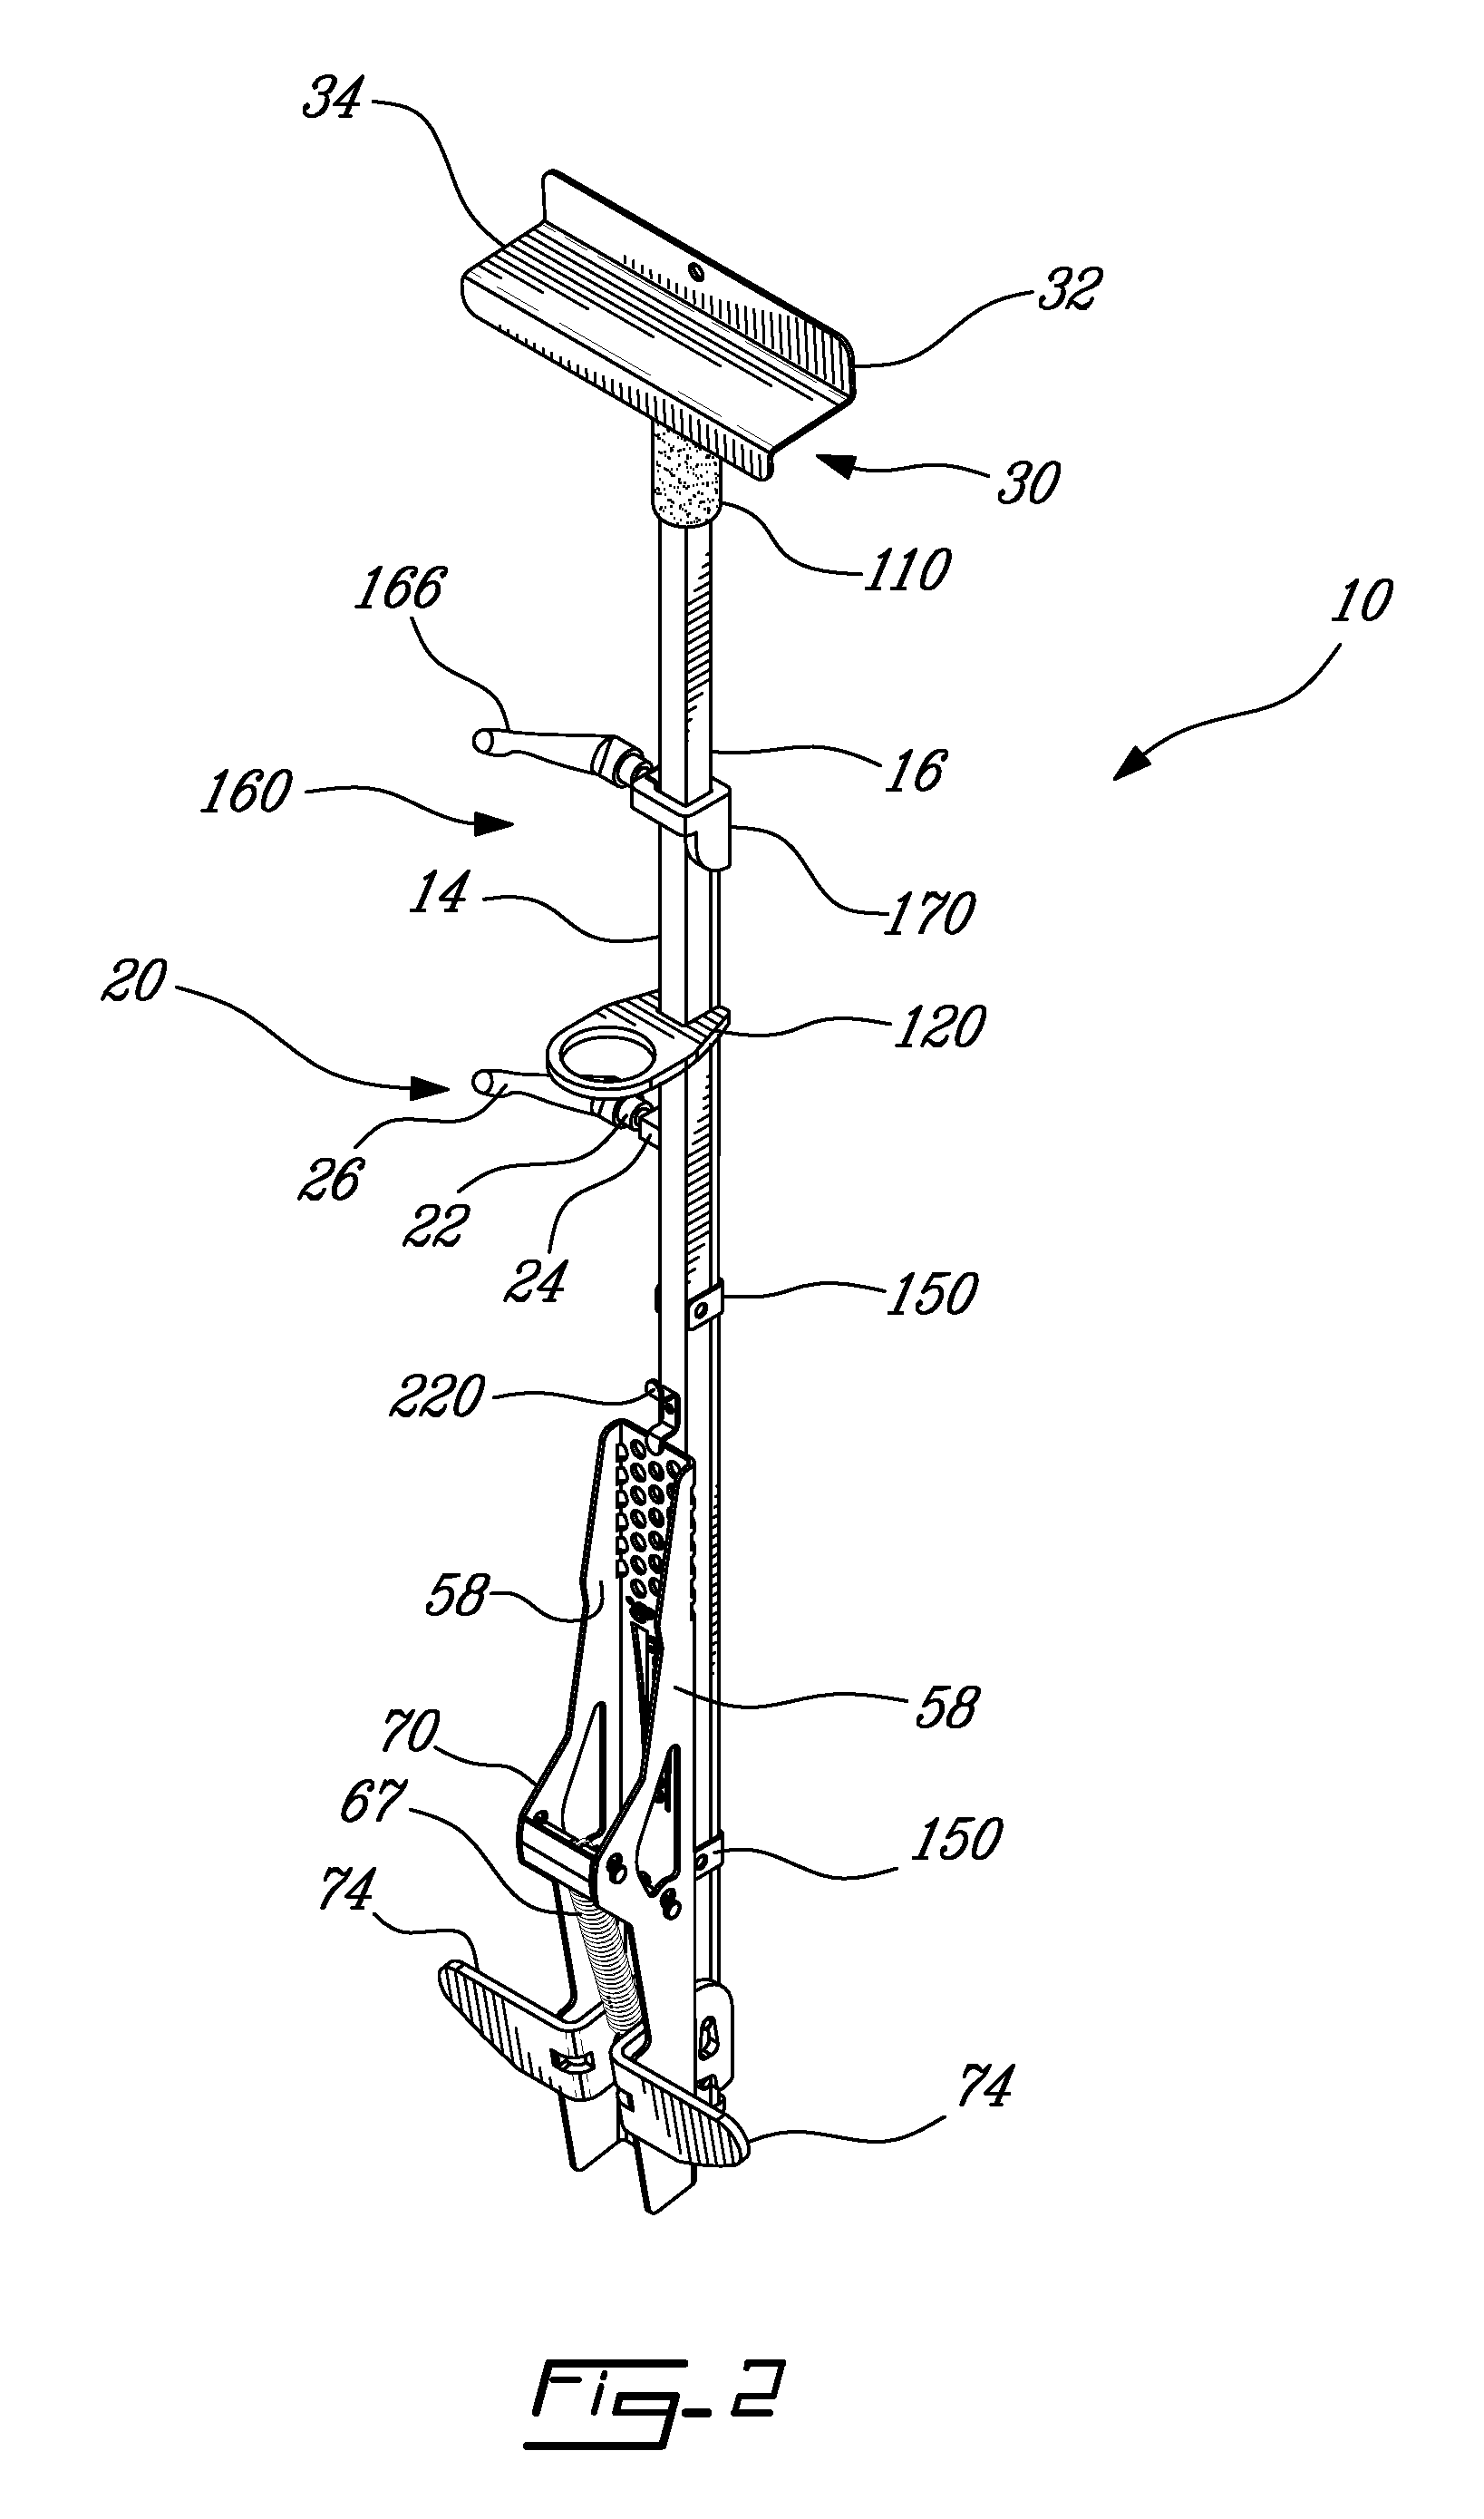 Device for holding and positioning construction materials